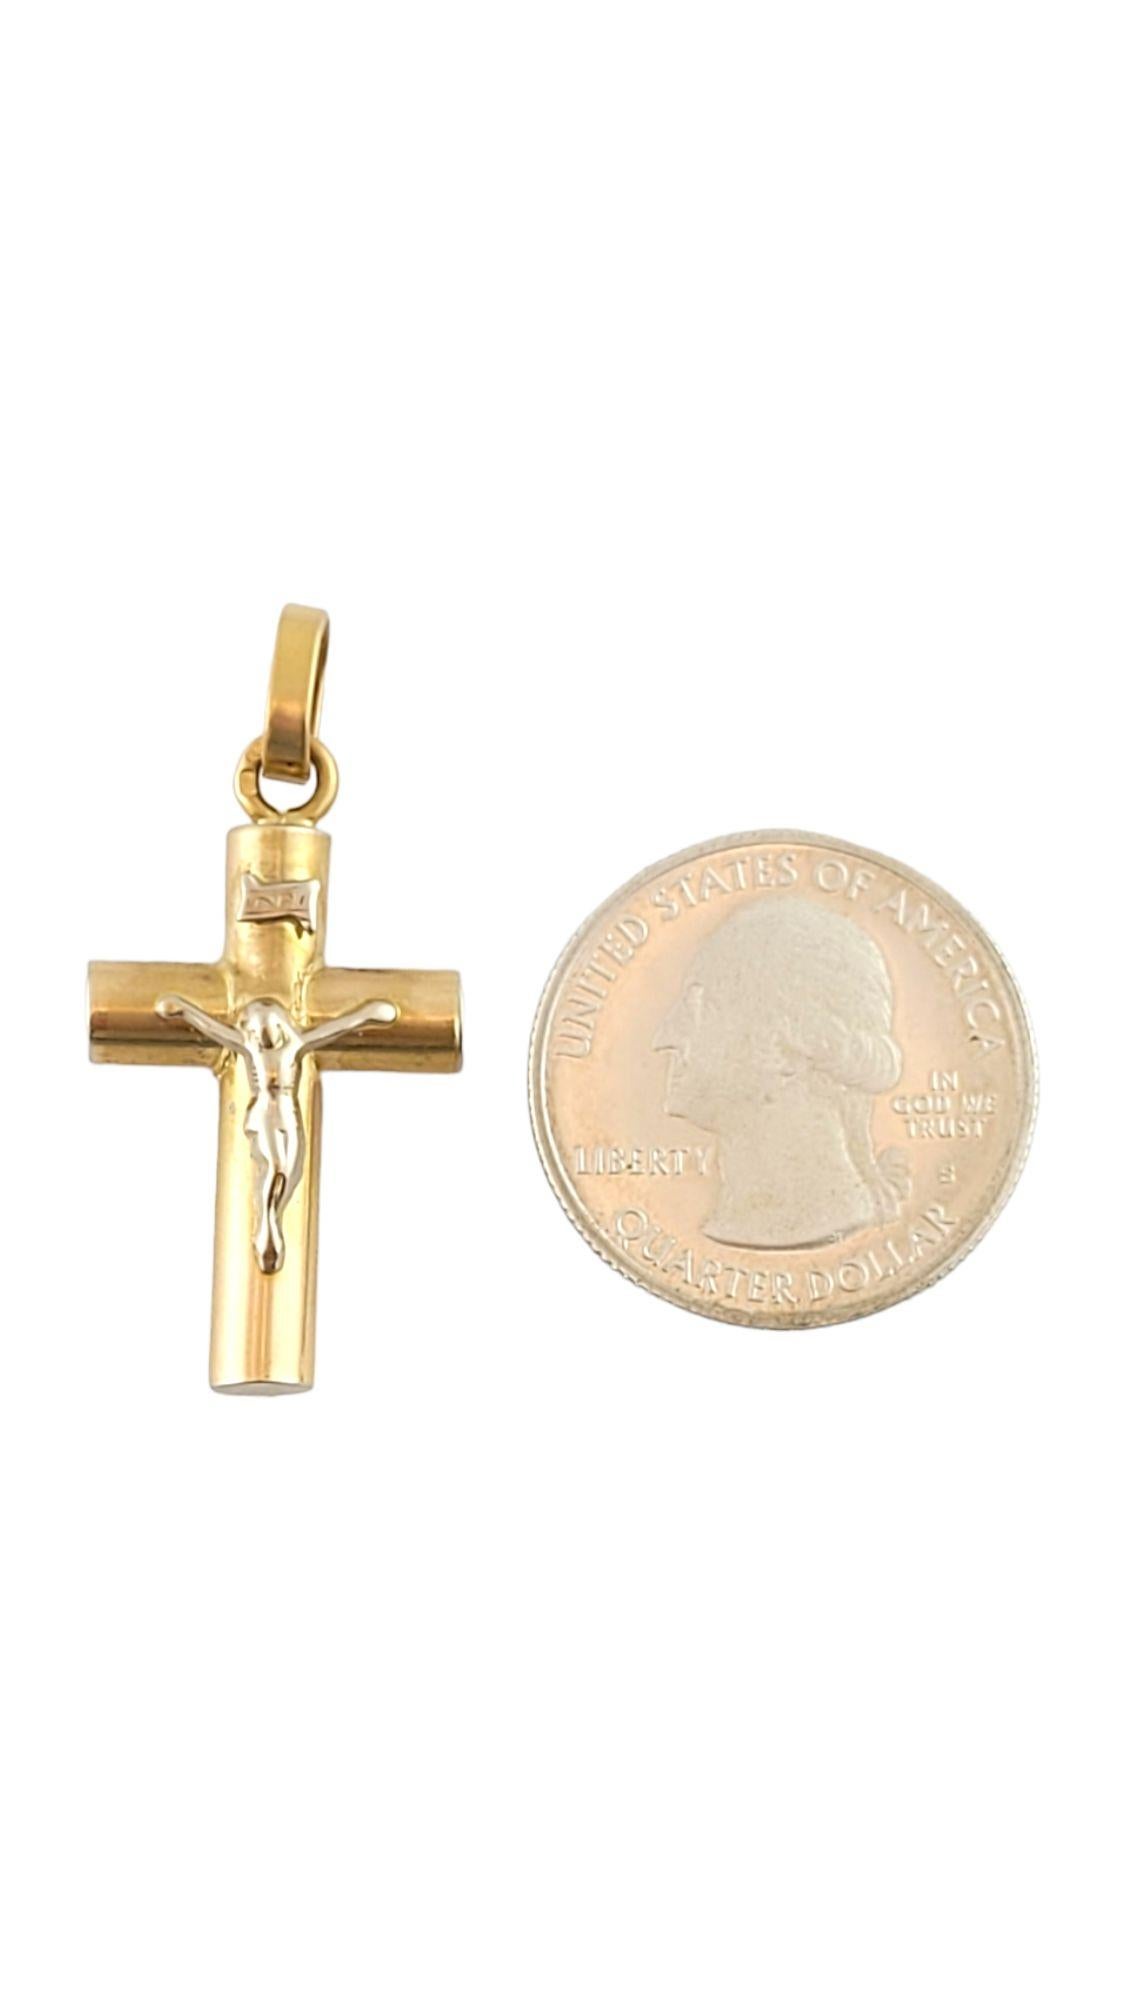 Gorgeous 19.2K white and yellow Portuguese gold pendant representing Jesus on a cross!

Size: 31.7mm X 17.8mm X 7mm

Length w/ bail: 38.1mm

Weight: 4.05 g/ 2.6 dwt

Hallmark: 800 with deer head

Very good condition, professionally polished.

Will